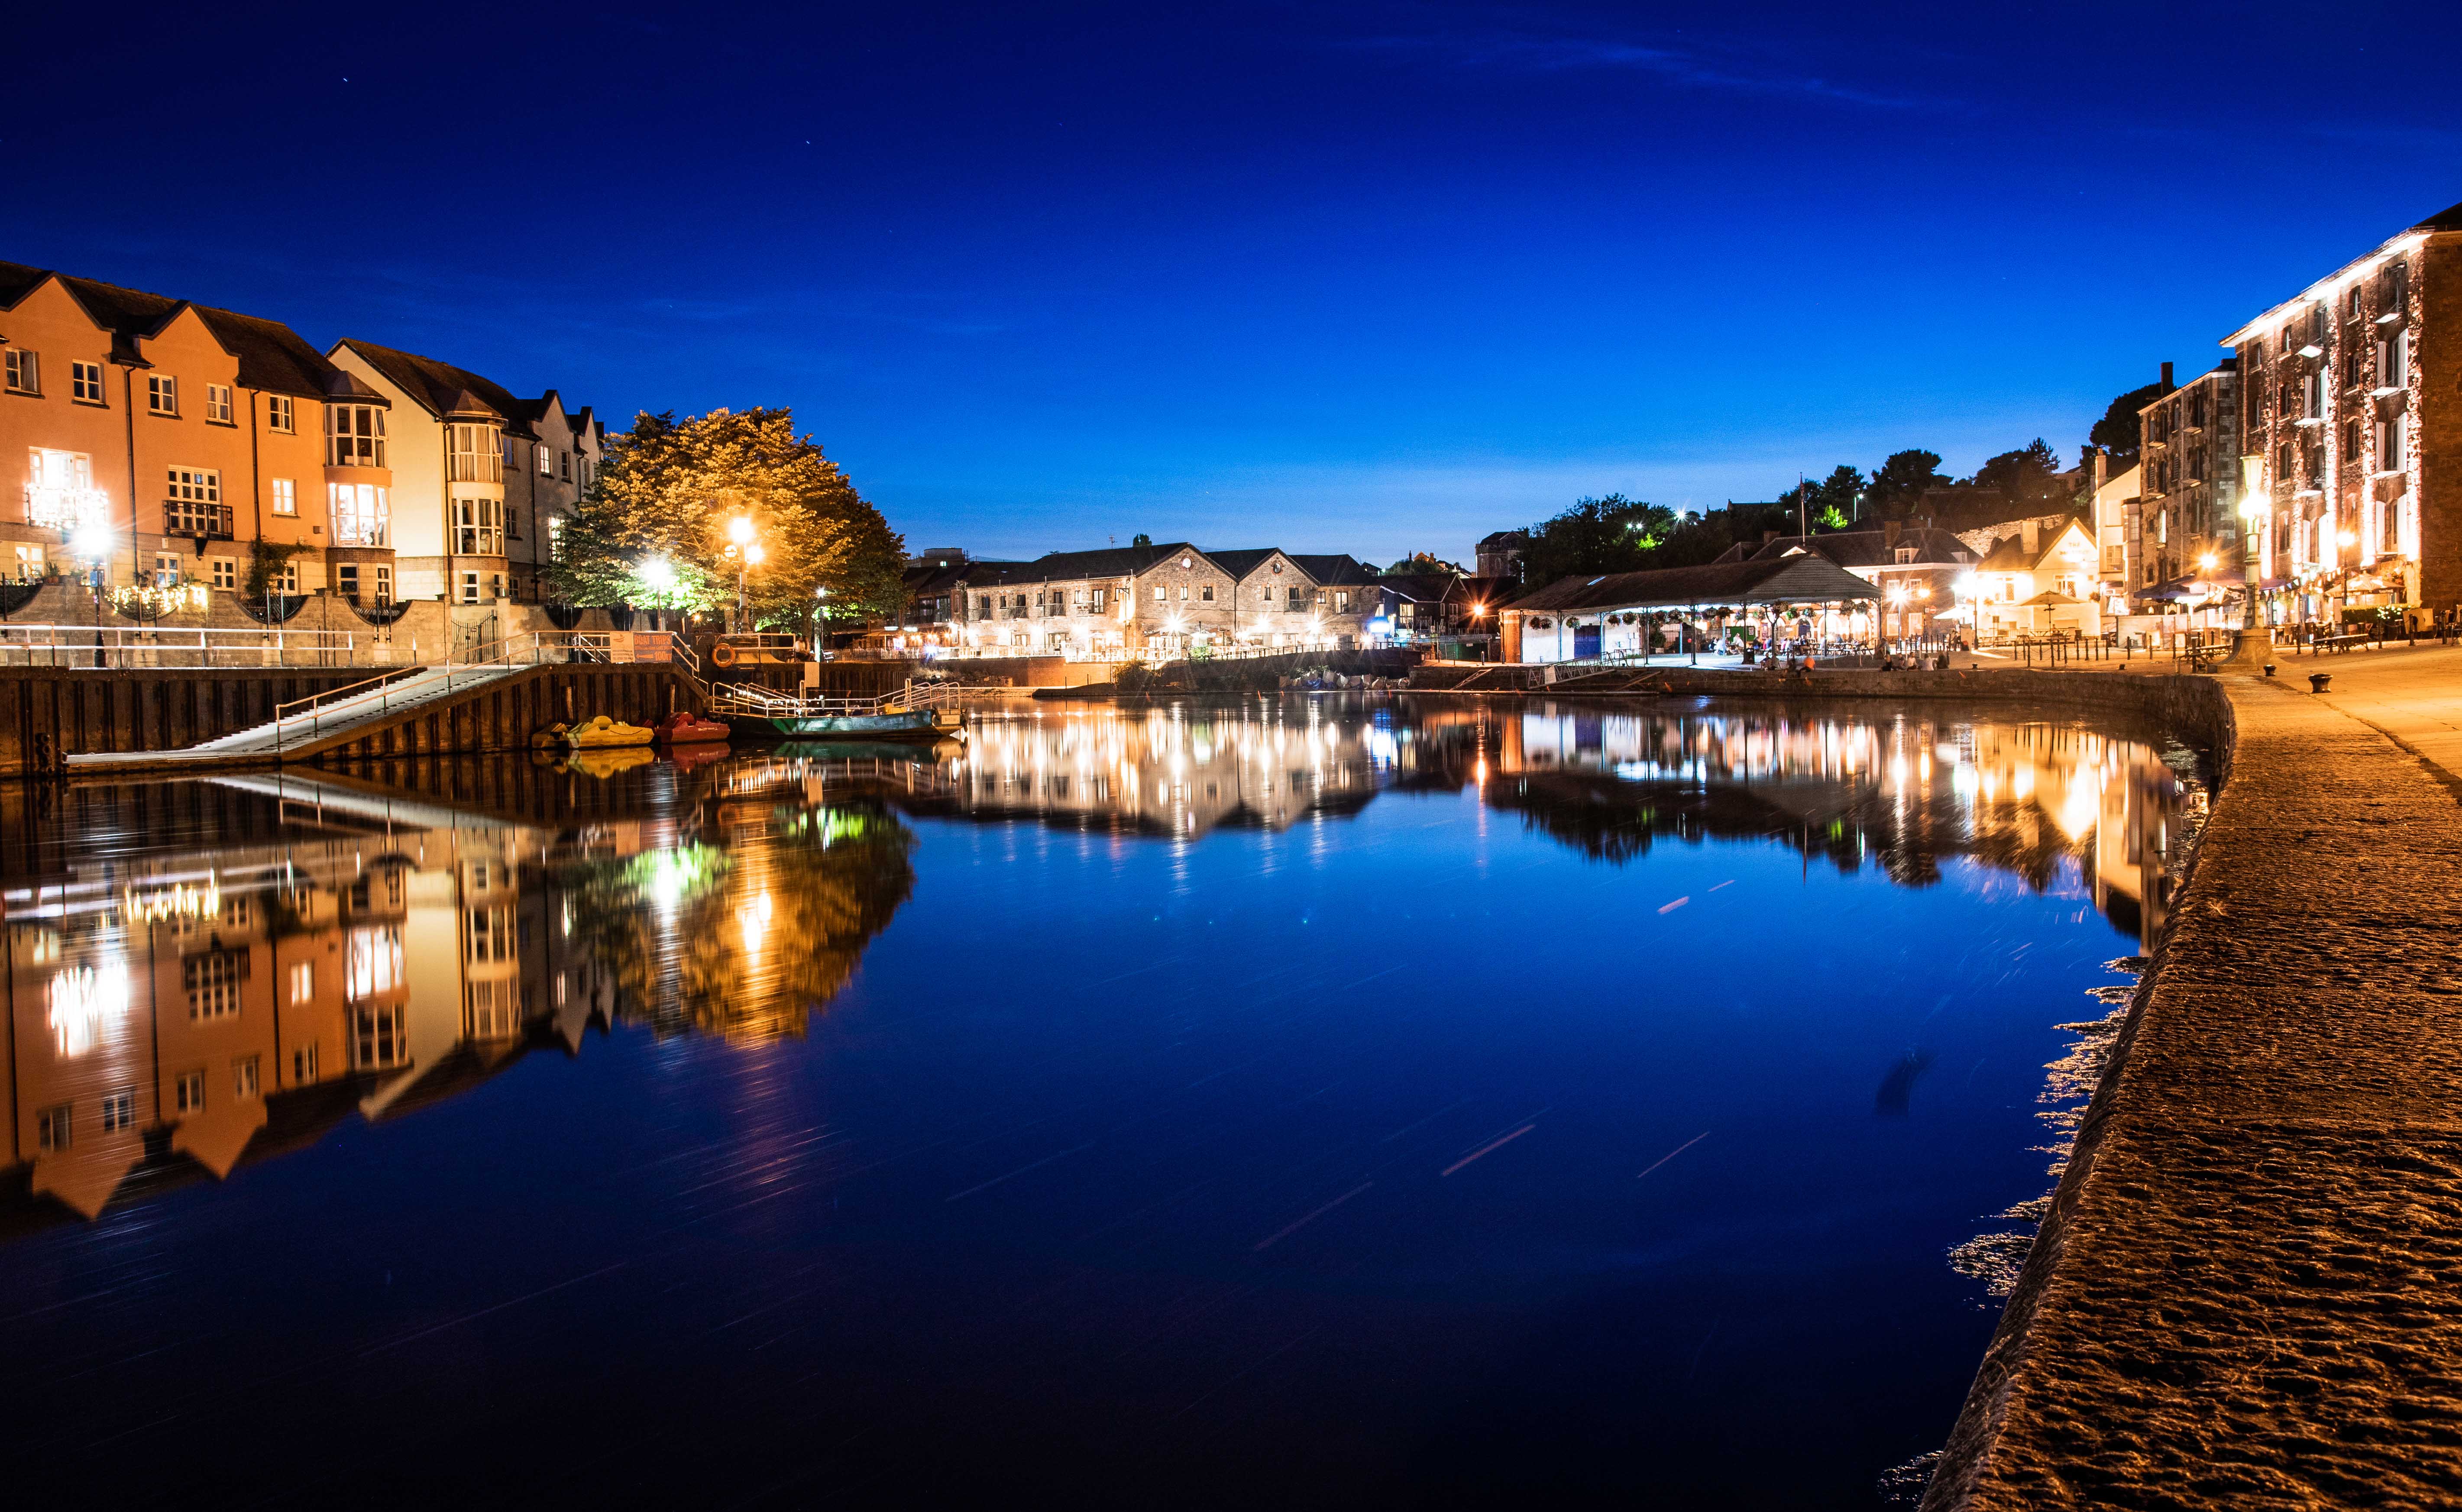 Exeter Quays lit up at night